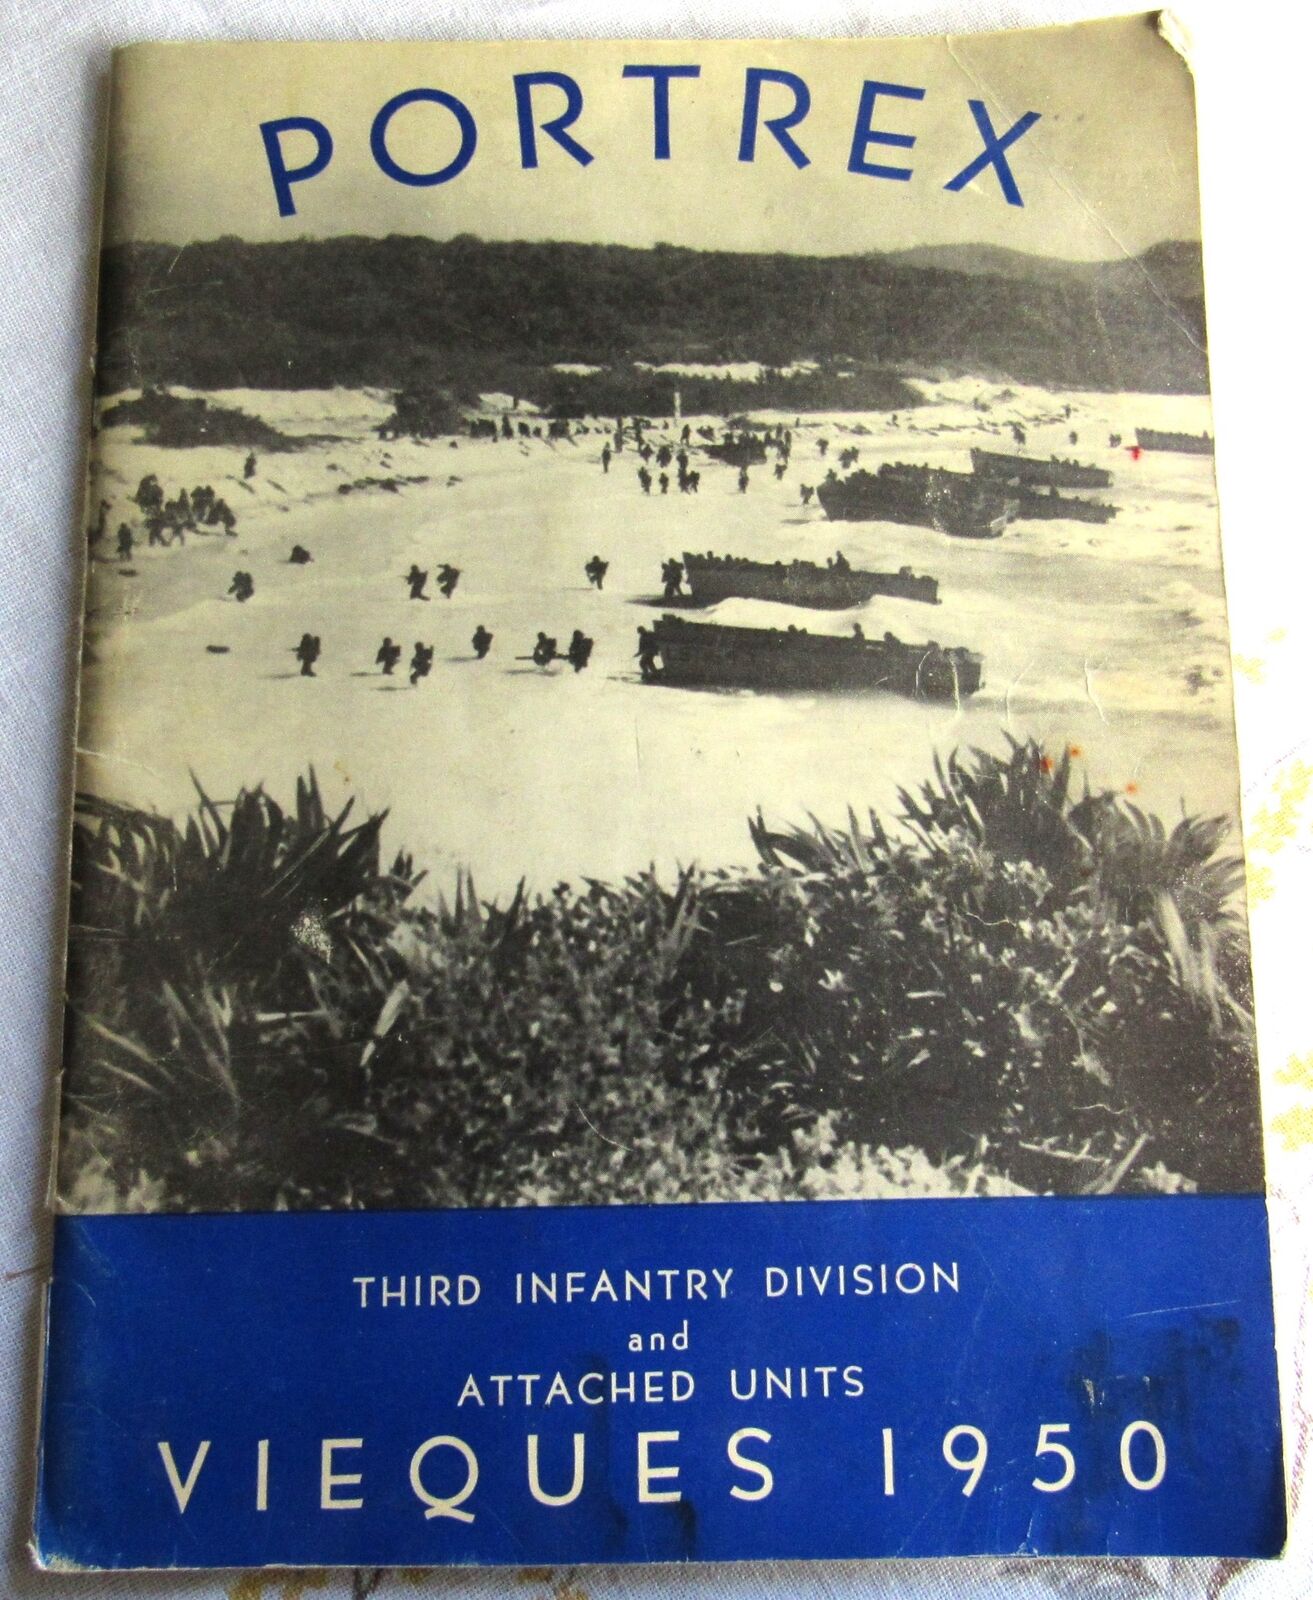 PORTREX 3rd Infantry Division Attached Units Vieques 1950 Puerto Rico Photo Book